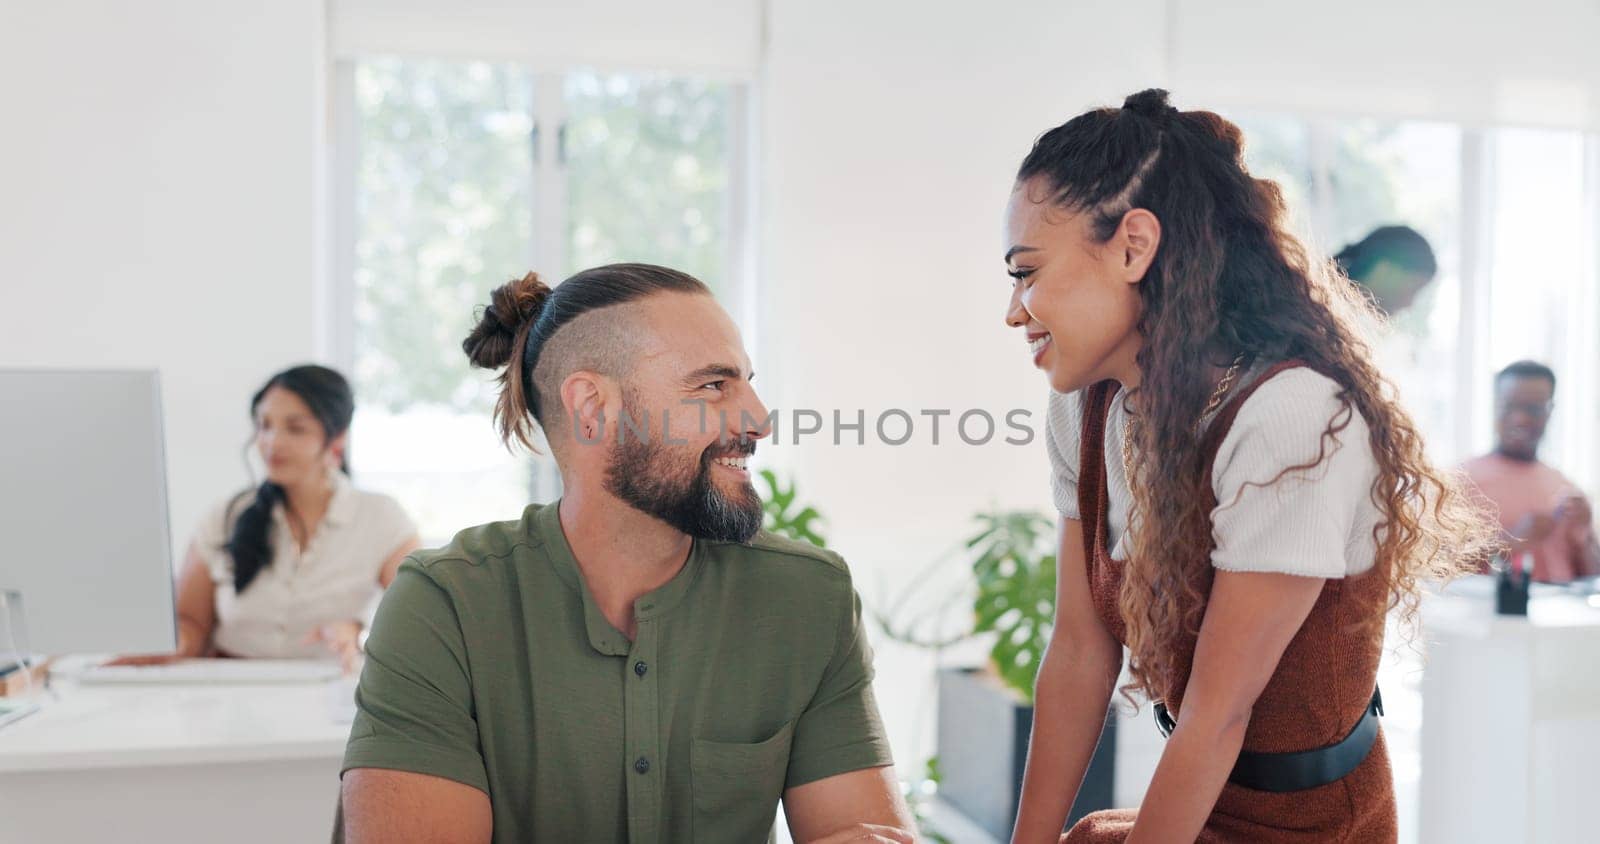 Flirting, planning and talking business people at work, funny conversation and happiness in an office. Comic, communication and smiling woman being flirtatious with a man while working together.